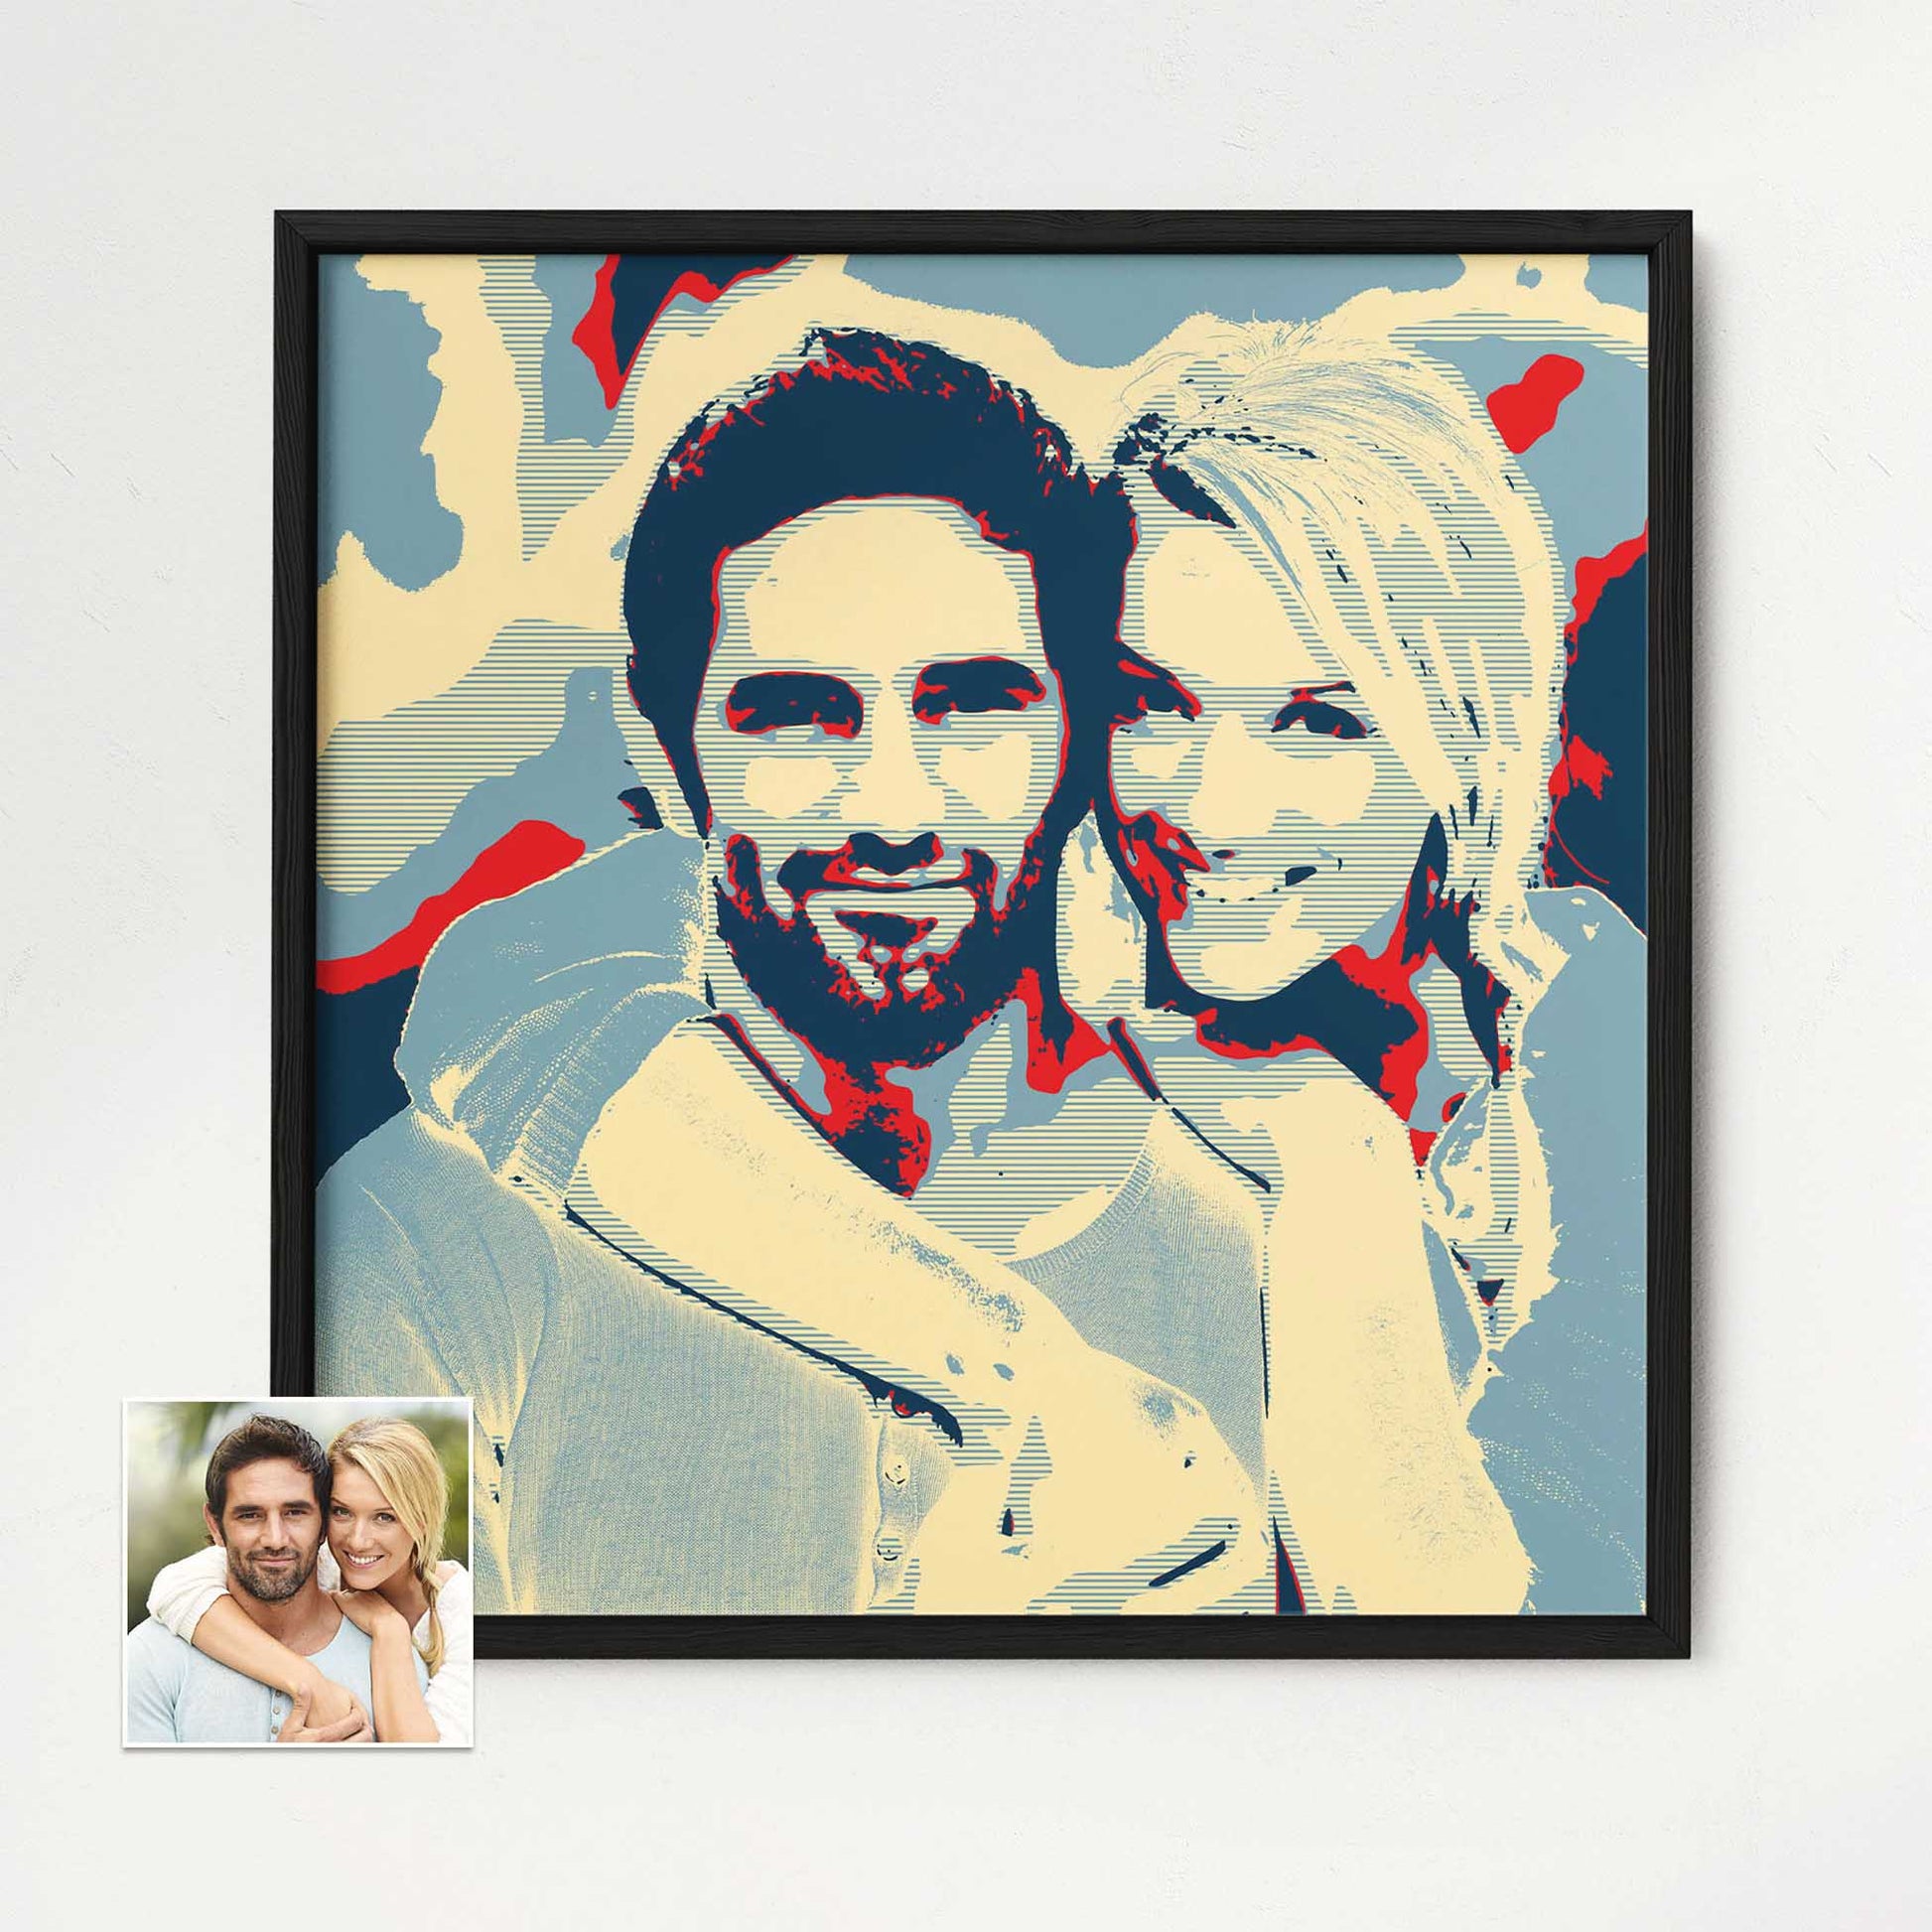 Personalised Election Poster Framed Print: A visual masterpiece created from your photo. The pop art effect adds a unique and vibrant touch, while the cool and sharp design brings a modern feel. With its gallery-quality wooden frame